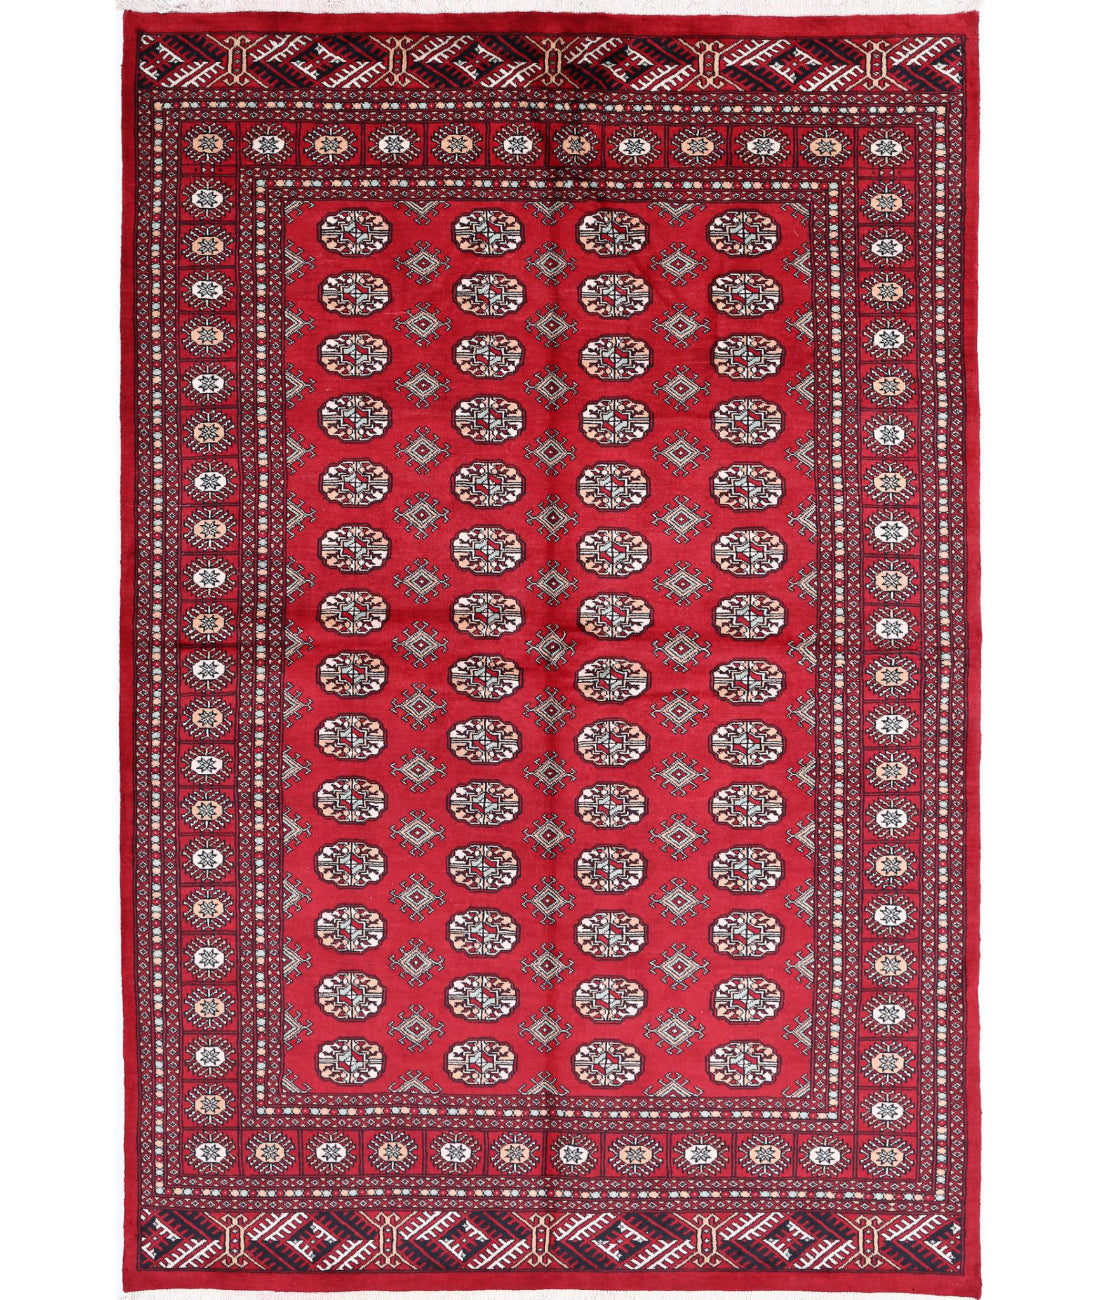 Hand Knotted Tribal Bokhara Wool Rug - 6&#39;2&#39;&#39; x 9&#39;2&#39;&#39; 6&#39;2&#39;&#39; x 9&#39;2&#39;&#39; (185 X 275) / Red / Black